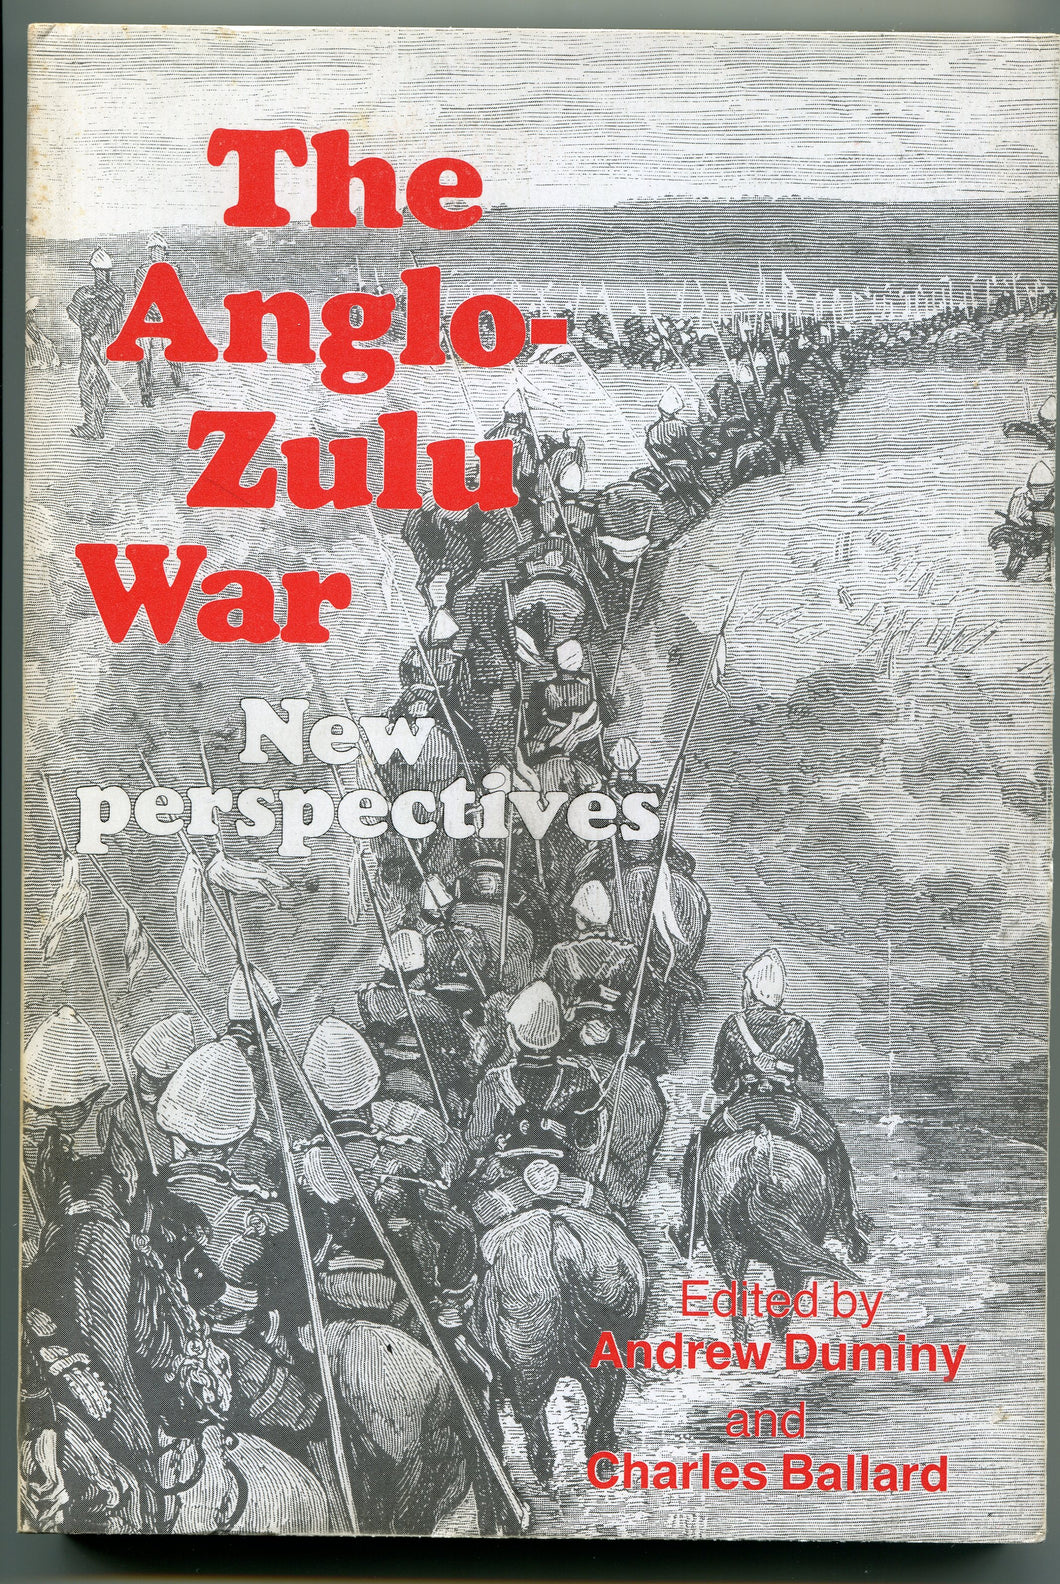 THE ANGLO-ZULU WAR; NEW PERSPECTIVES, edited by Andrew Duminy and Charles Ballard